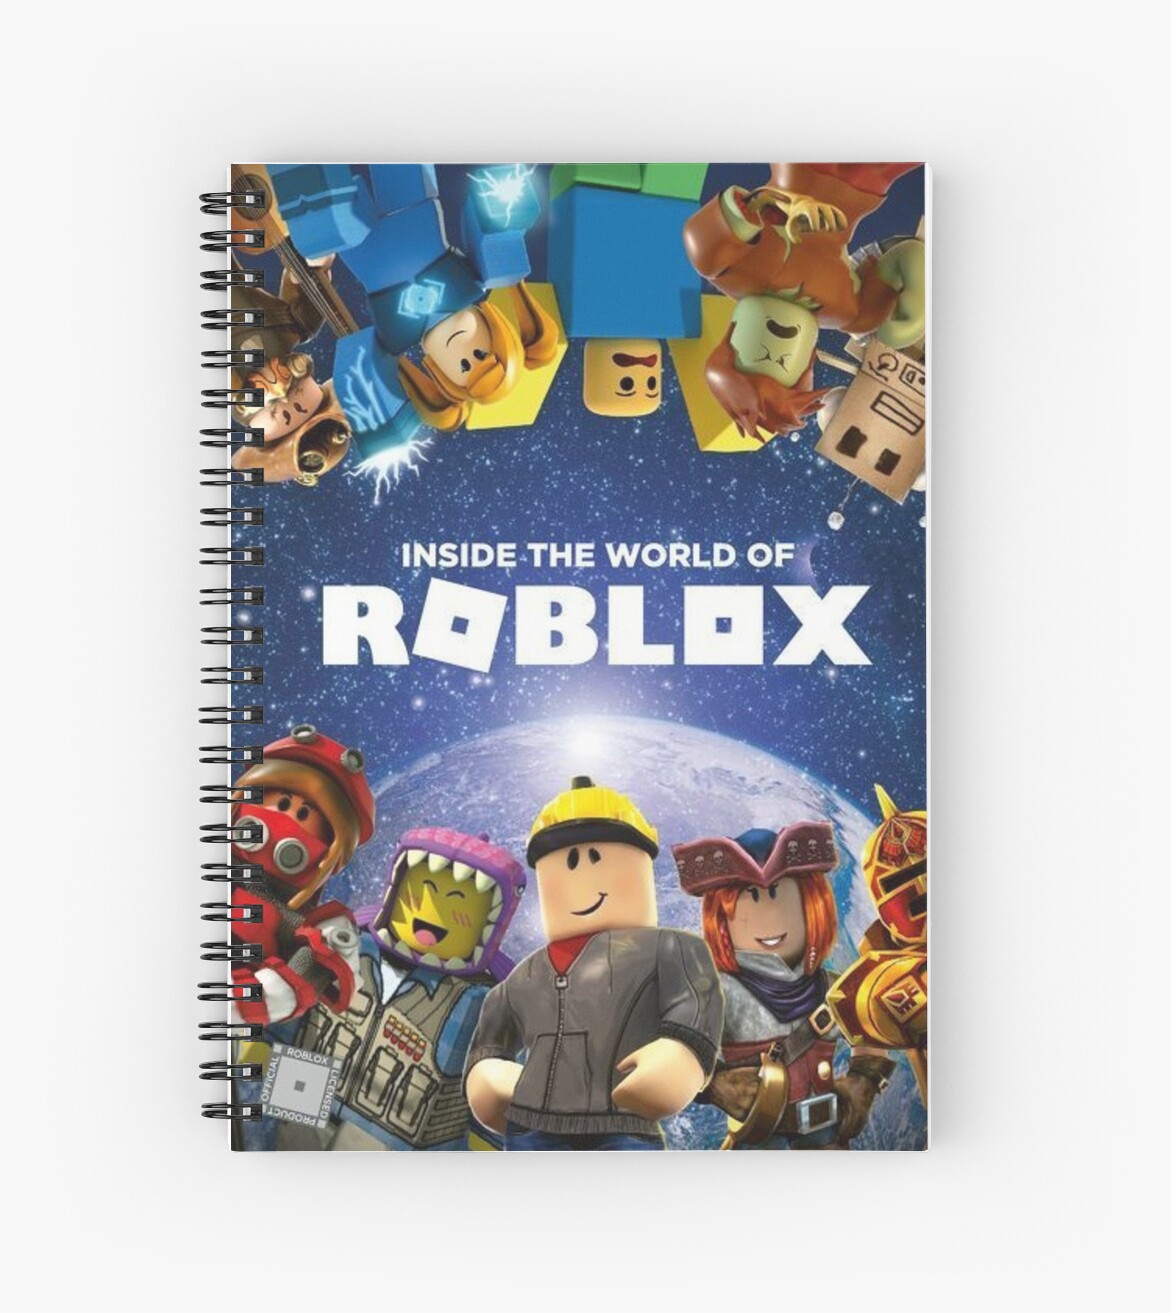 Inside The World Of Roblox Games Spiral Notebook By - roblox laptop sleeve by jogoatilanroso redbubble